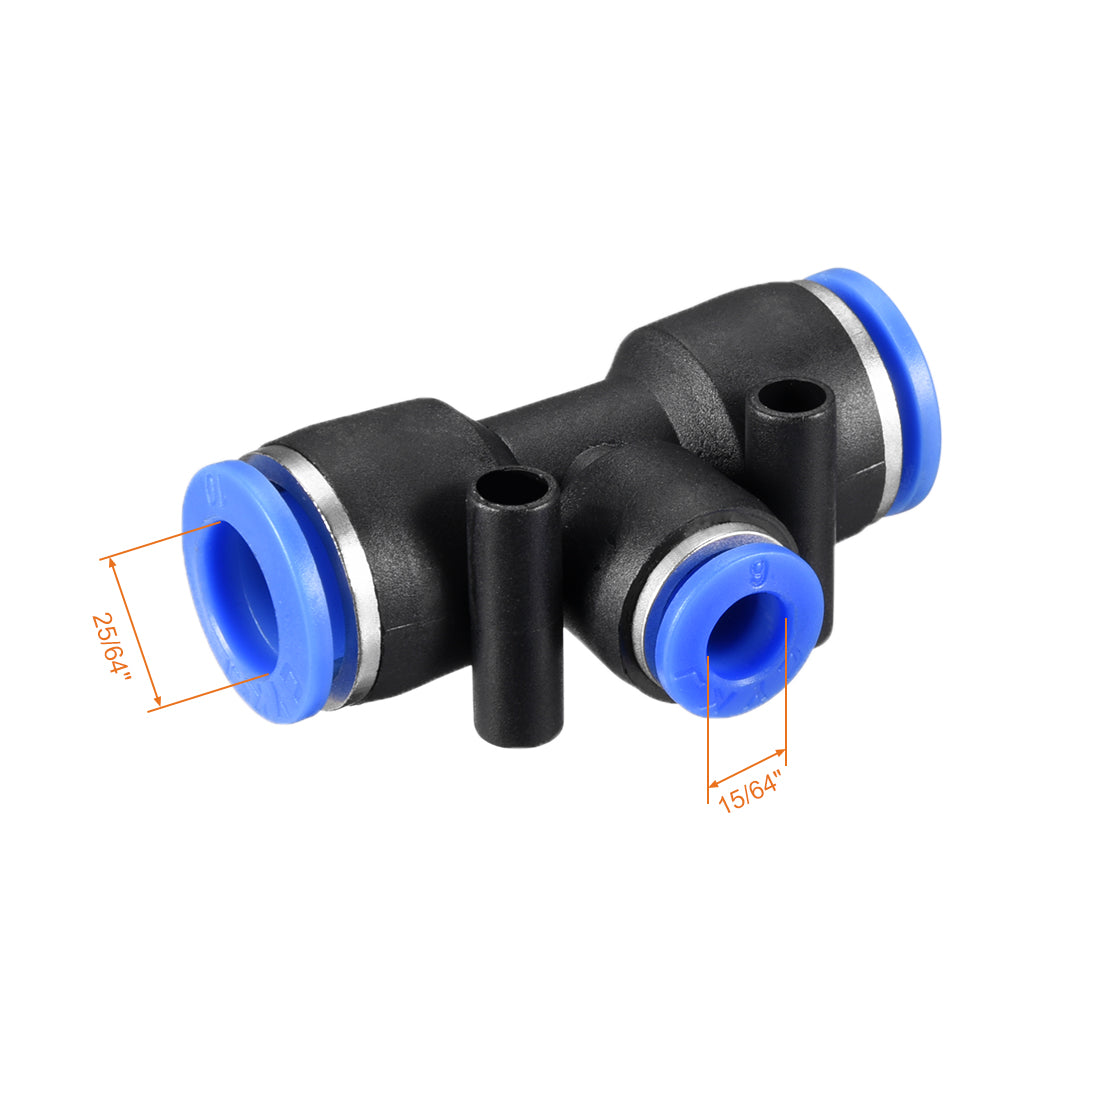 uxcell Uxcell 4 pcs Push To Connect Fittings T Type Tube Connect 25/64“ -15/64” od Push Fit Fittings Tube Fittings Push Lock Blue (10-6mm T tee)